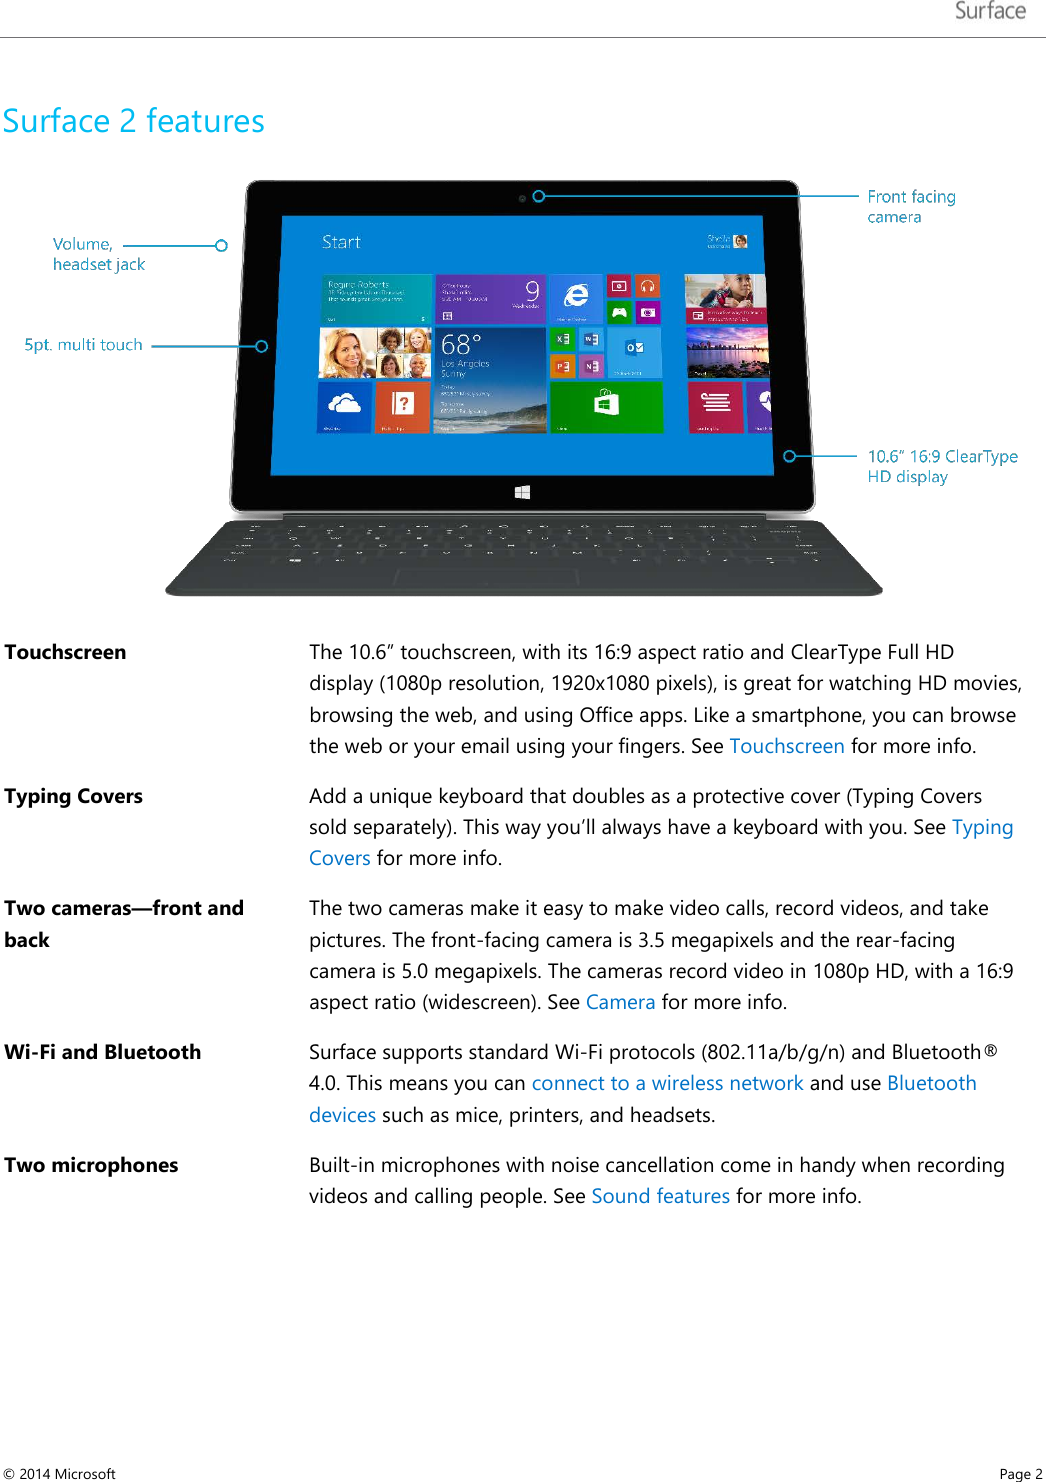   Surface 2 features  Touchscreen  The 10.6” touchscreen, with its 16:9 aspect ratio and ClearType Full HD display (1080p resolution, 1920x1080 pixels), is great for watching HD movies, browsing the web, and using Office apps. Like a smartphone, you can browse the web or your email using your fingers. See Touchscreen for more info. Typing Covers  Add a unique keyboard that doubles as a protective cover (Typing Covers sold separately). This way you’ll always have a keyboard with you. See Typing Covers for more info. Two cameras—front and back The two cameras make it easy to make video calls, record videos, and take pictures. The front-facing camera is 3.5 megapixels and the rear-facing camera is 5.0 megapixels. The cameras record video in 1080p HD, with a 16:9 aspect ratio (widescreen). See Camera for more info. Wi-Fi and Bluetooth  Surface supports standard Wi-Fi protocols (802.11a/b/g/n) and Bluetooth® 4.0. This means you can connect to a wireless network and use Bluetooth devices such as mice, printers, and headsets.  Two microphones   Built-in microphones with noise cancellation come in handy when recording videos and calling people. See Sound features for more info.    © 2014 Microsoft     Page 2  